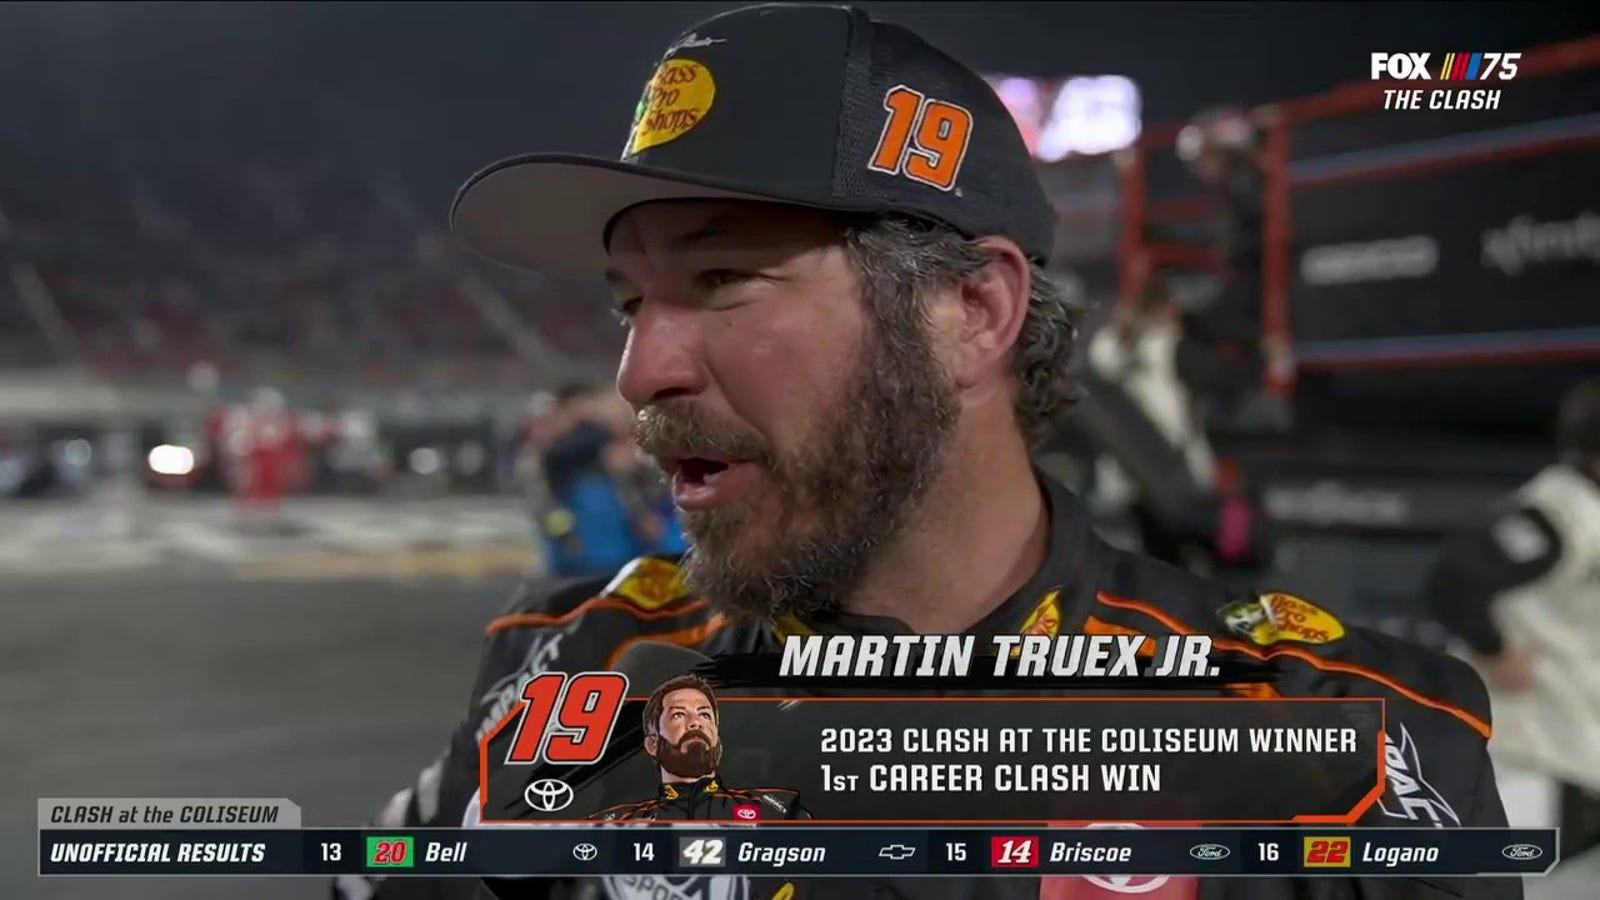 'Tonight is to persevere and not give up' – Martin Truex Jr.